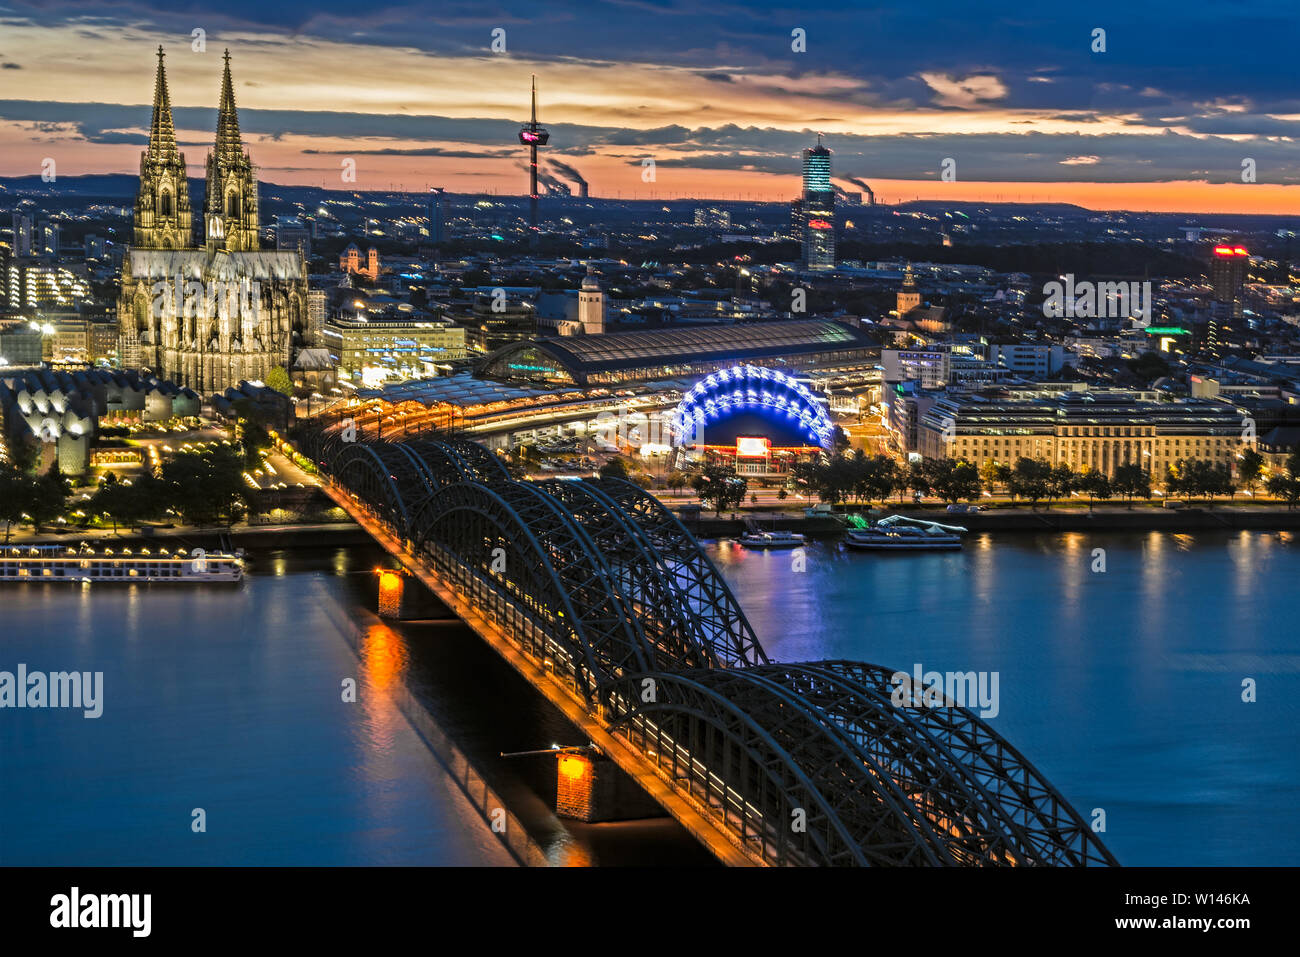 COLOGNE, GERMANY - MAY 12: Night cityscape of Cologne, Germany on May 12, 2019. View from Triangle tower to the cathedral and Hohenzolern Bridge. Stock Photo